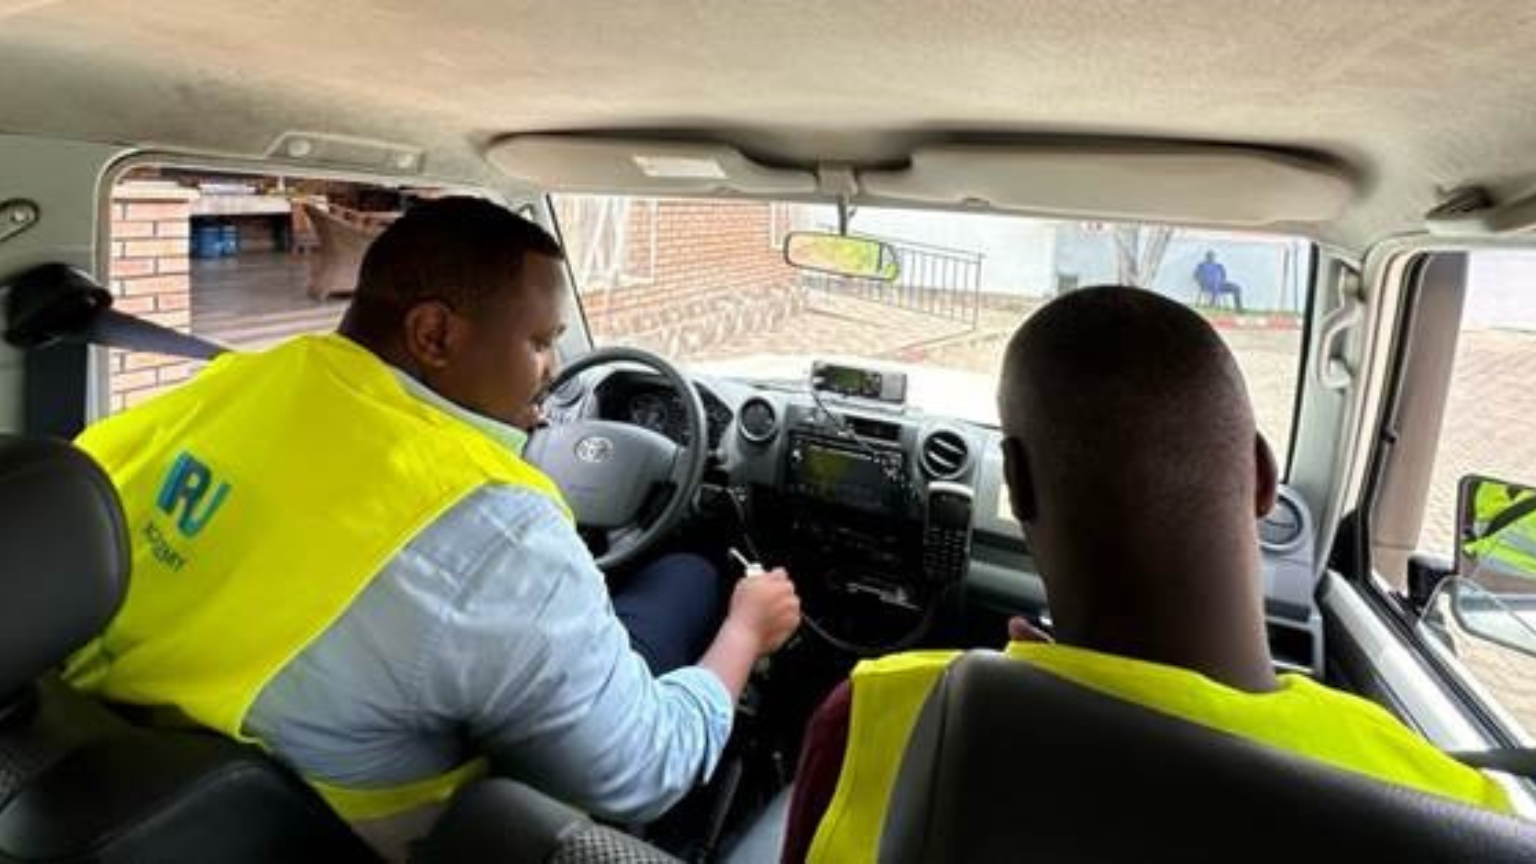 To reduce road accidents in Cameroon, Rwanda, Uganda, and the Democratic Republic of the Congo, IRU is providing a comprehensive defensive driver training framework to the United Nations High Commissioner for Refugees (UNHCR).